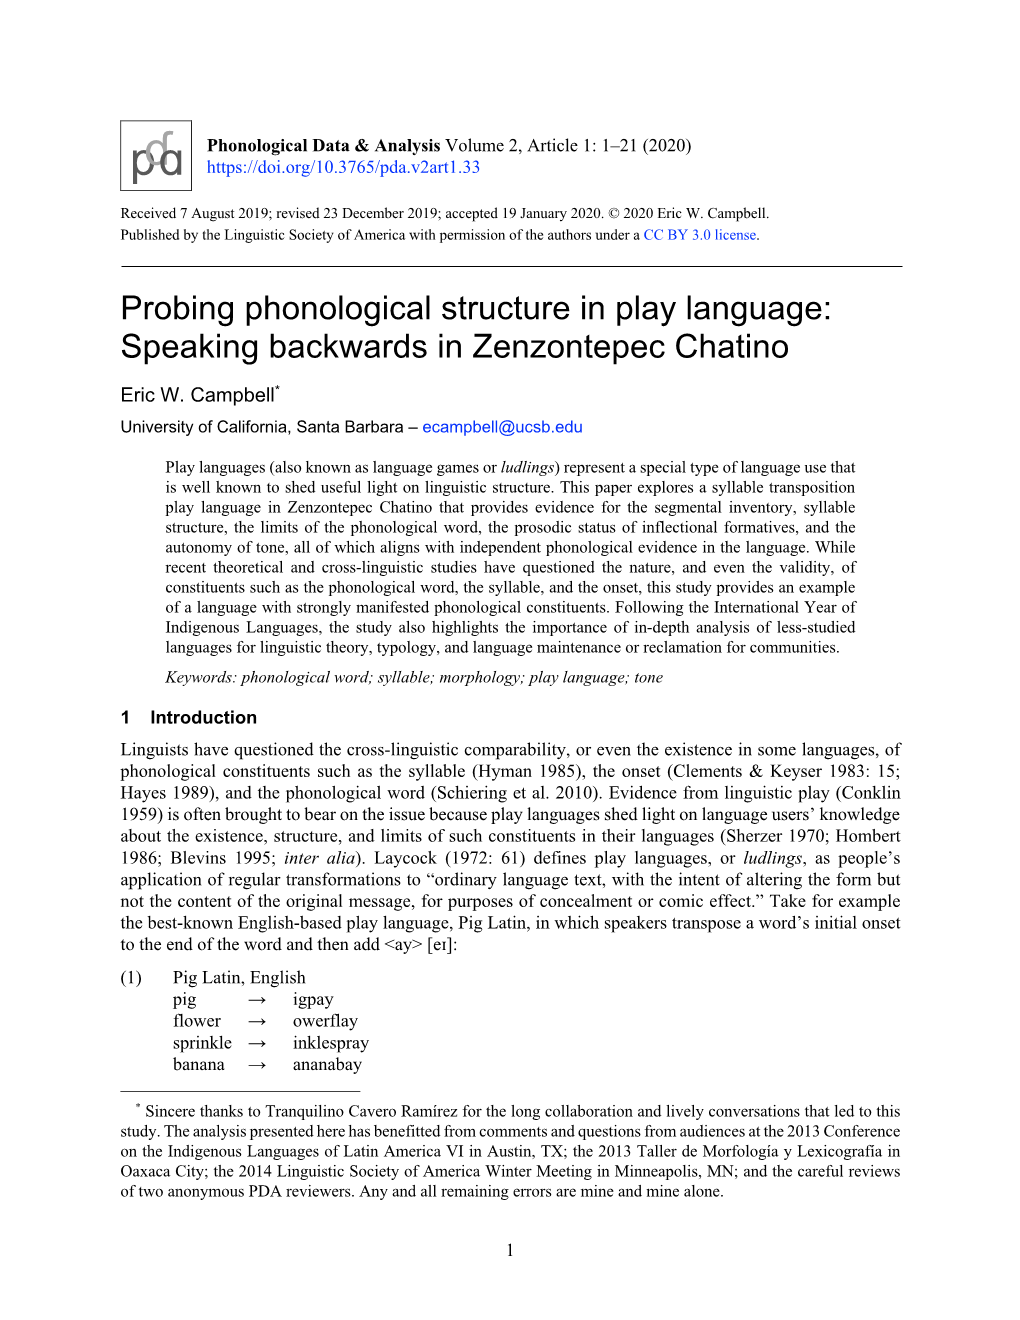 Probing Phonological Structure in Play Language: Speaking Backwards in Zenzontepec Chatino